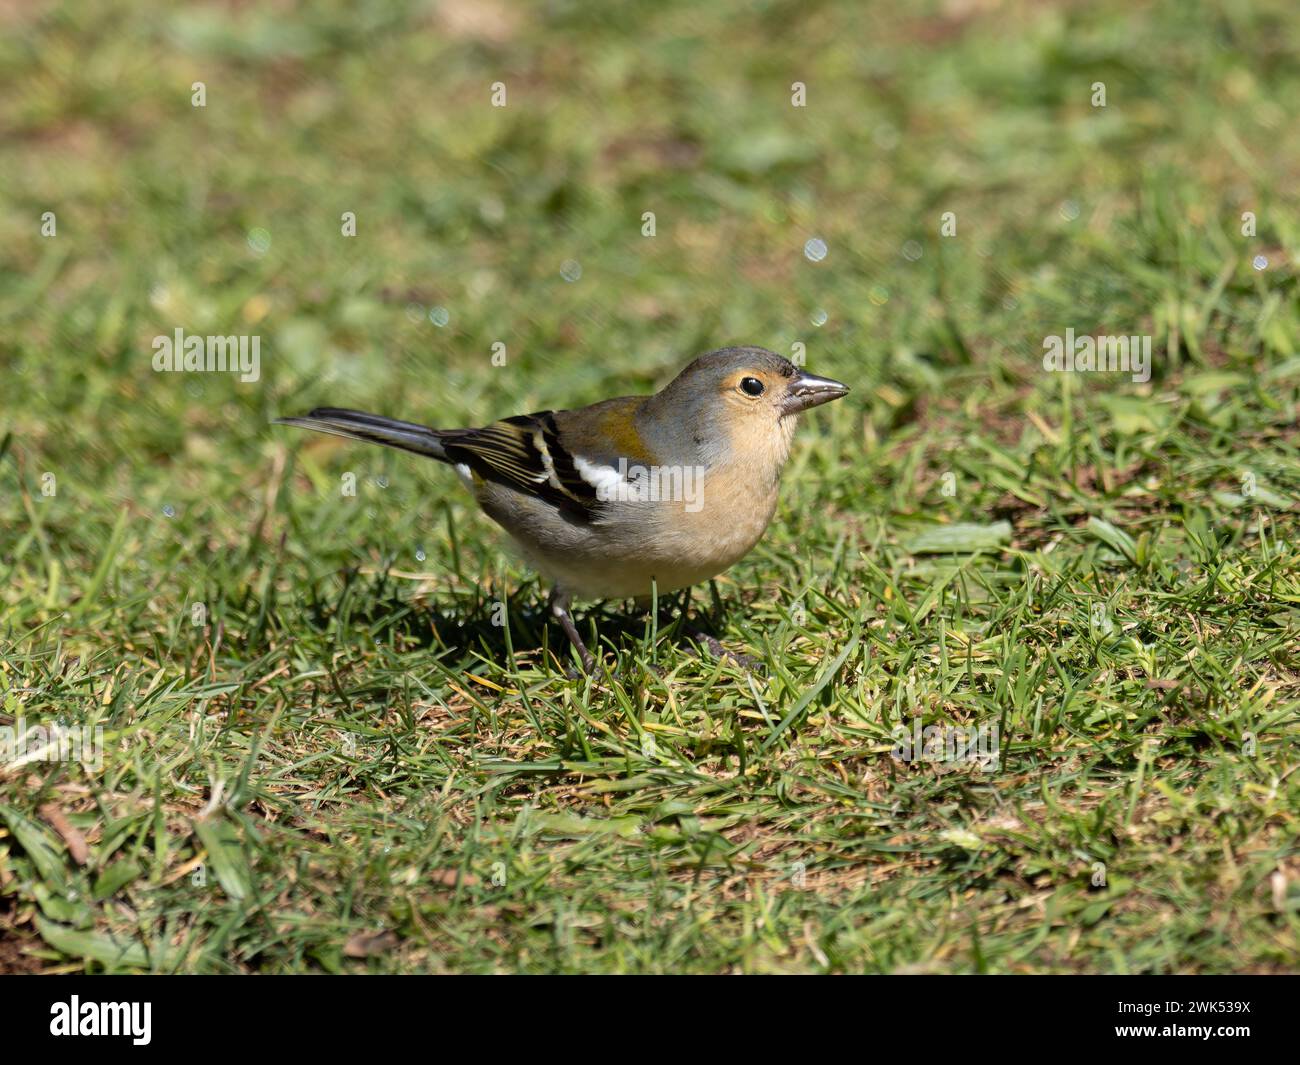 A male Madeiran chaffinch, Fringilla maderensis, which is endemic to the island of Madeira. Stock Photo